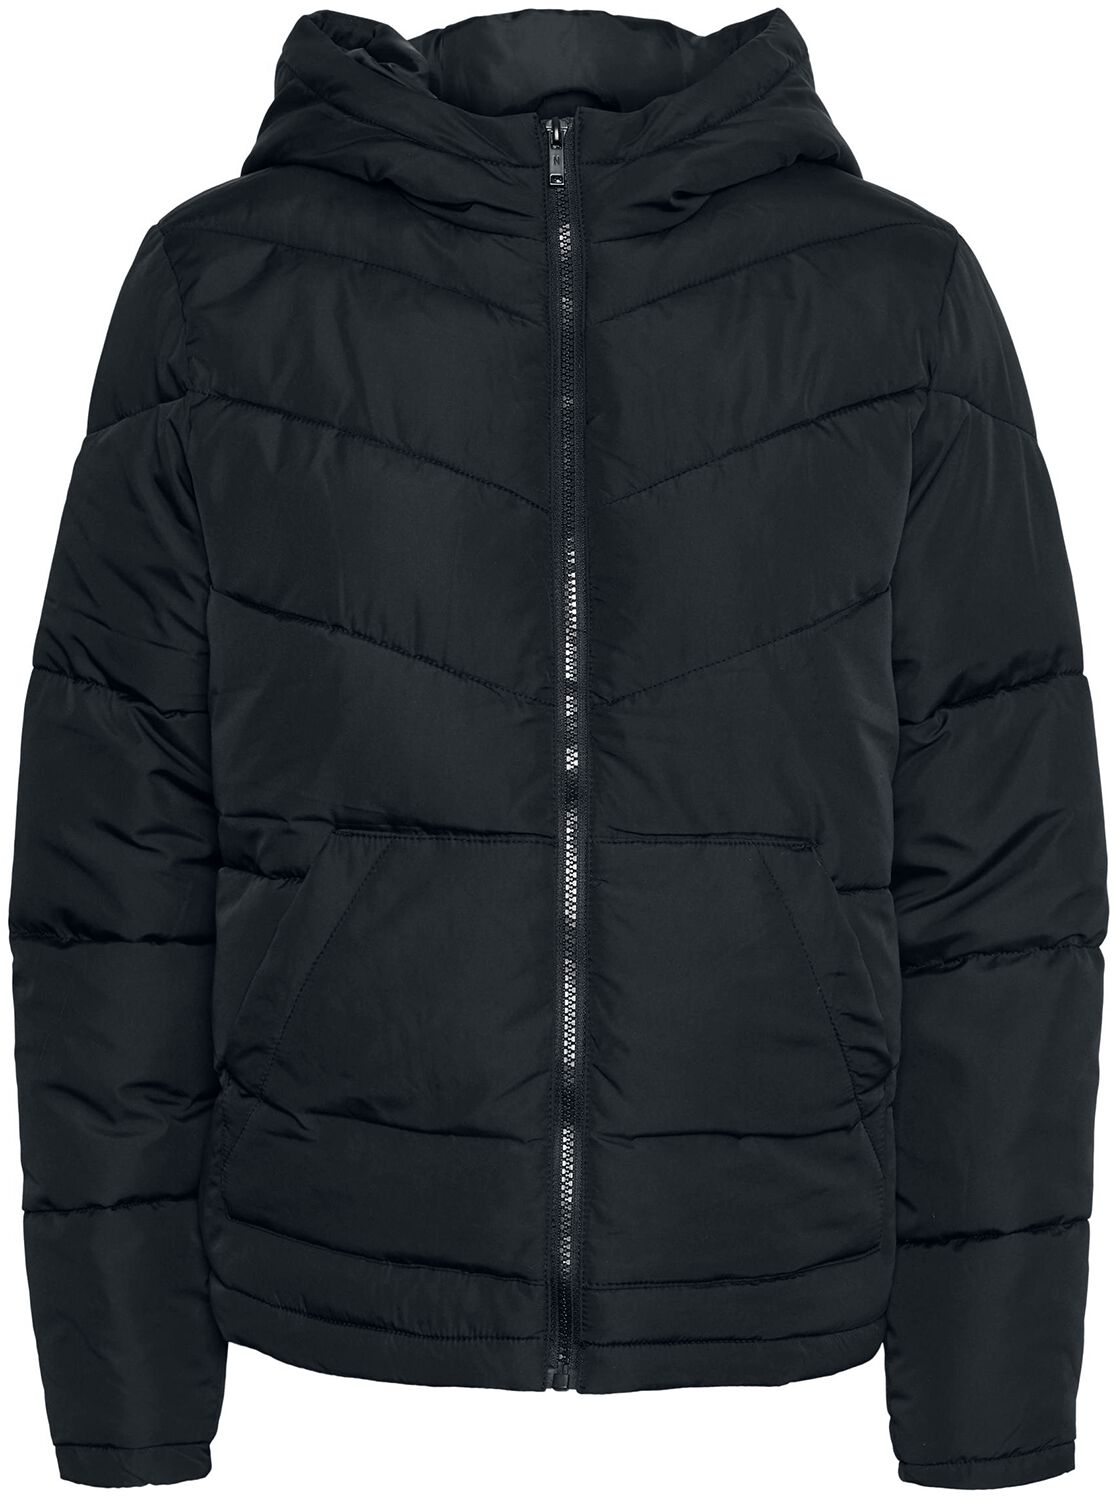 Image of Giacca invernale di Noisy May - Dalcon Jacket - XS a XL - Donna - nero